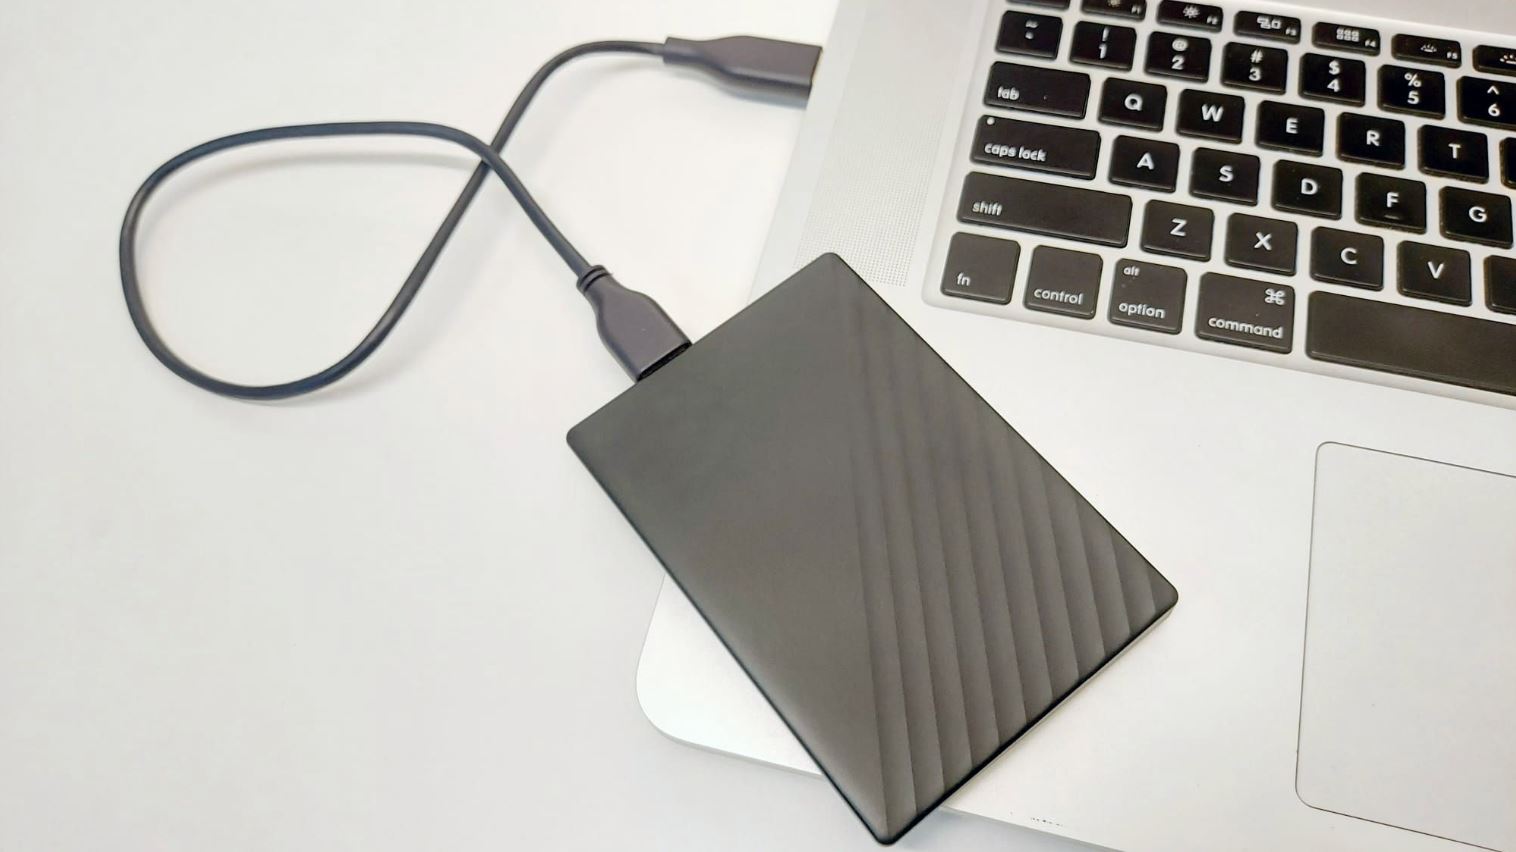 How To Save Files To External Hard Drive On Mac